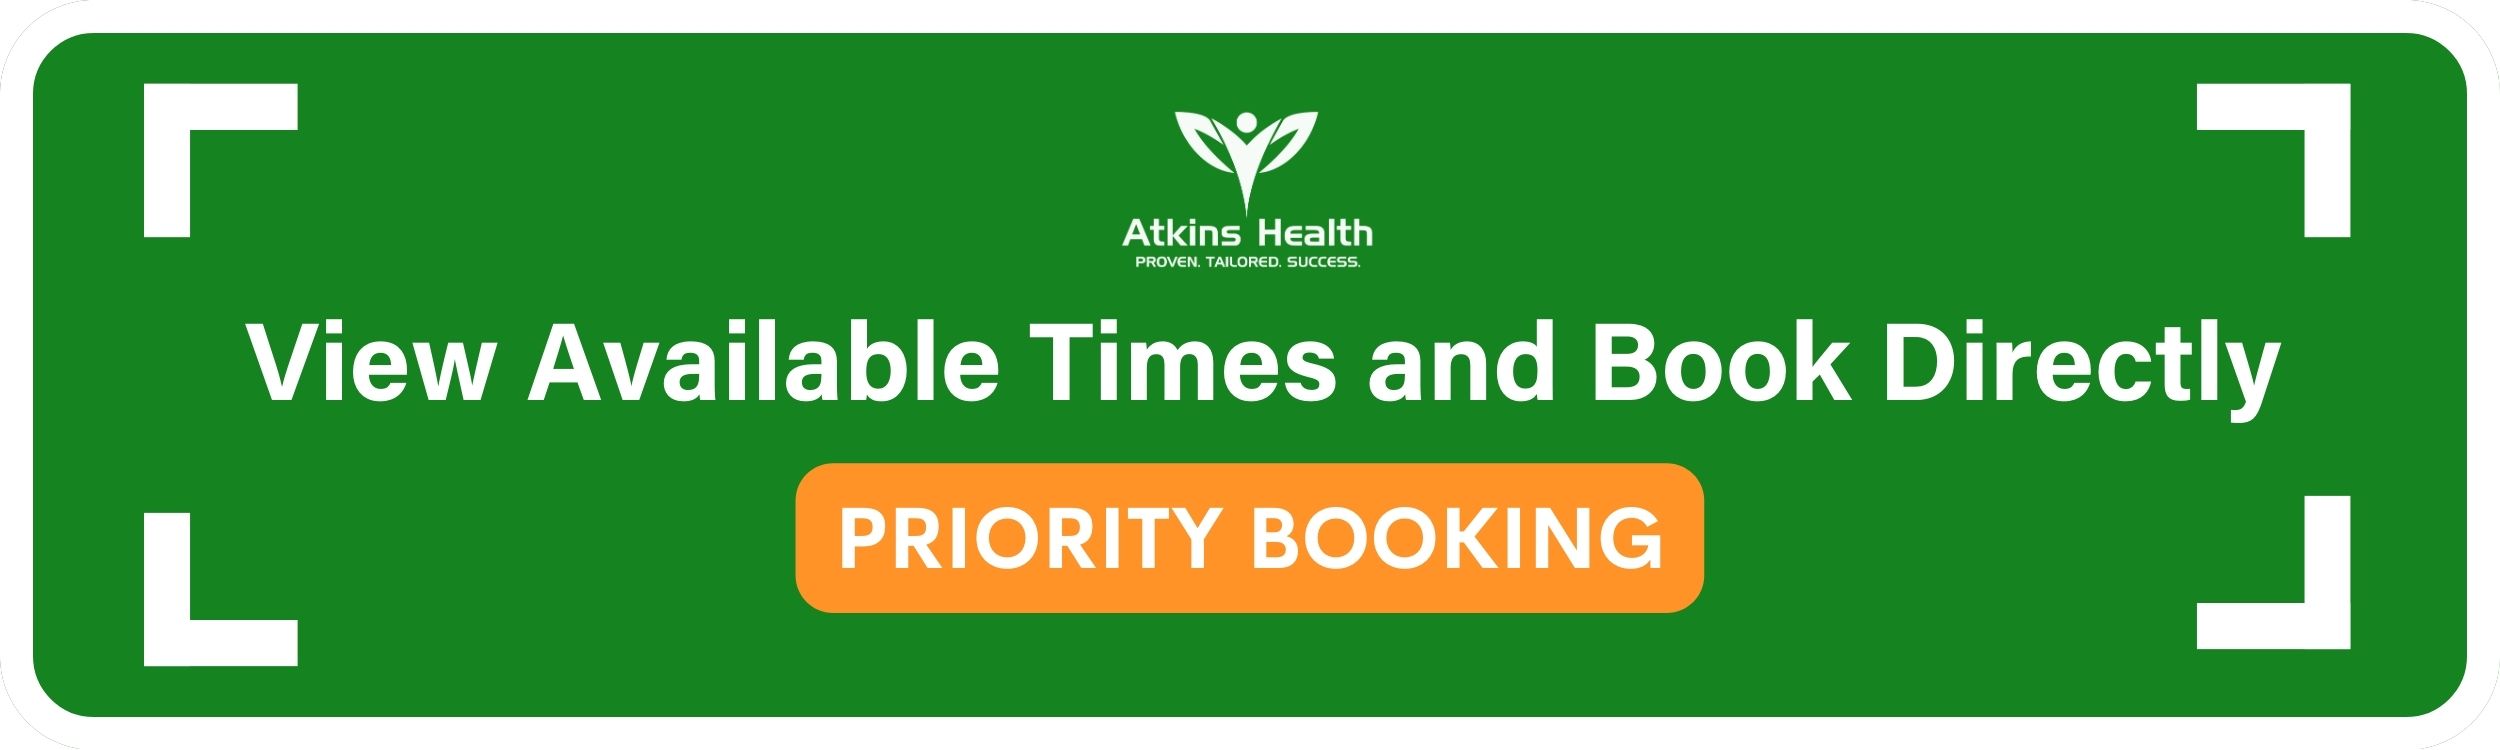 Priority-Booking-Atkins-Health